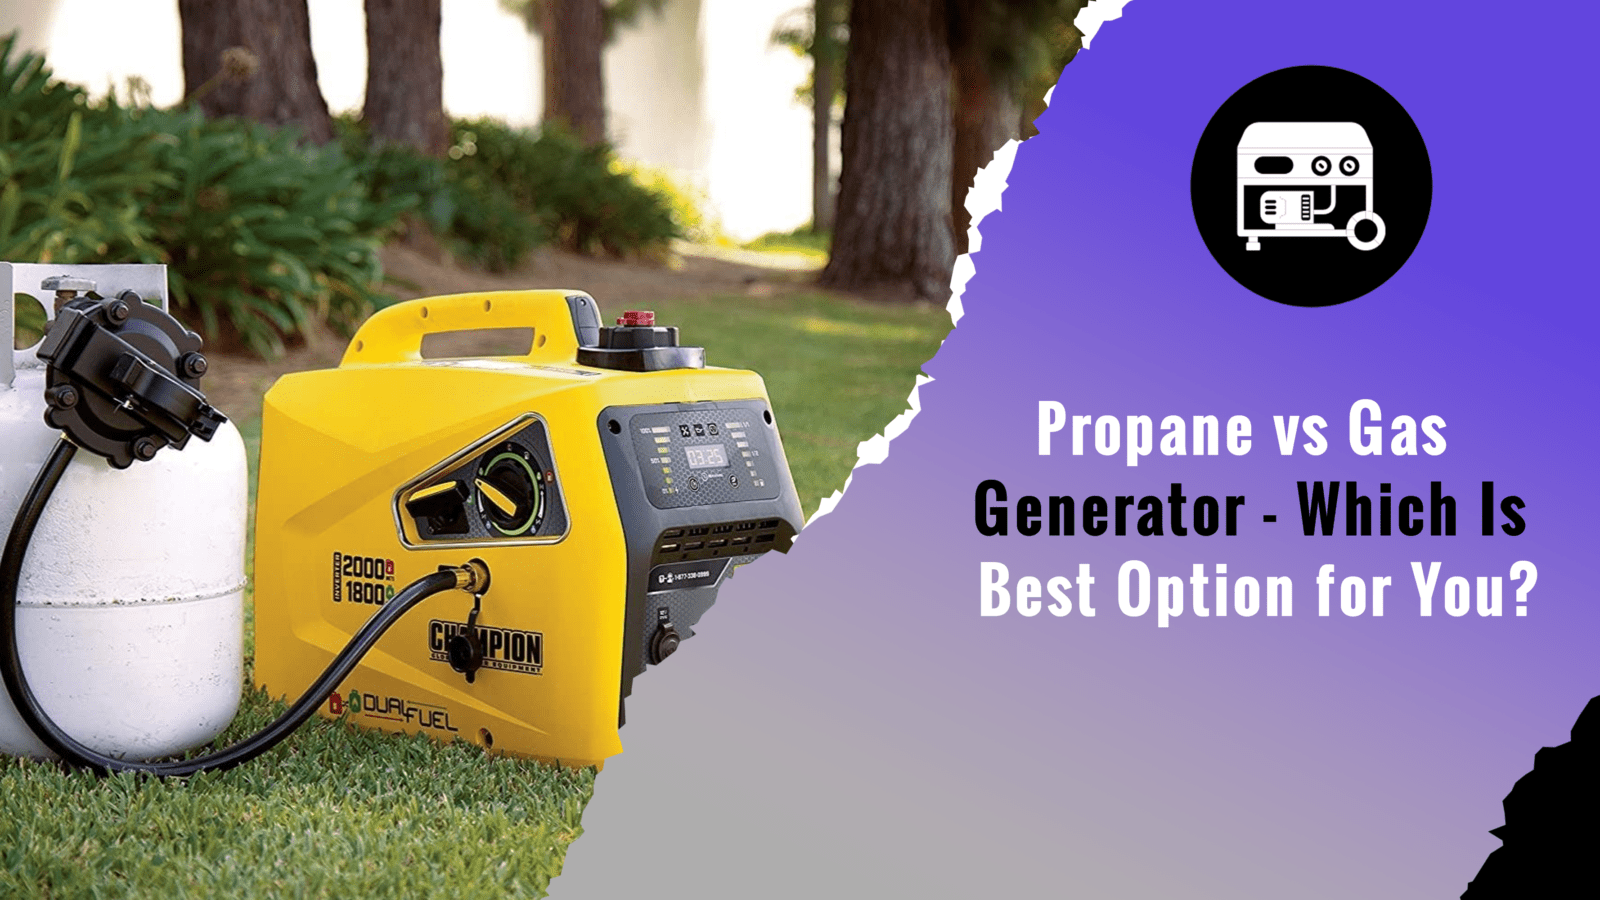 Propane vs Gas Generator - Which Is Best Option for You